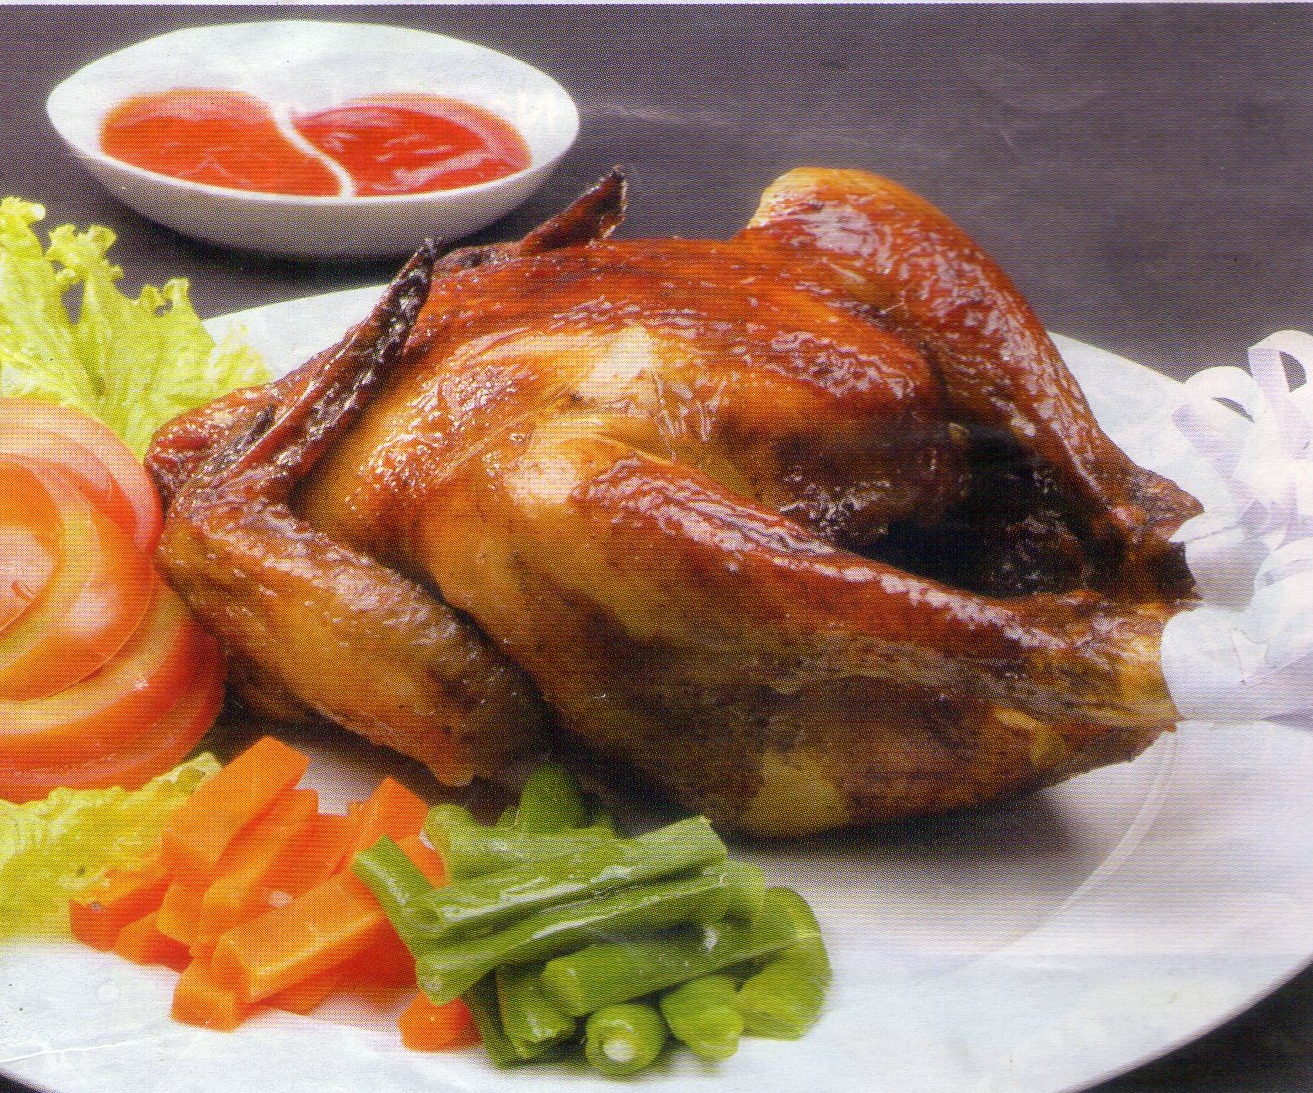 Search Recipes: Barbecued Roast Chicken Recipe